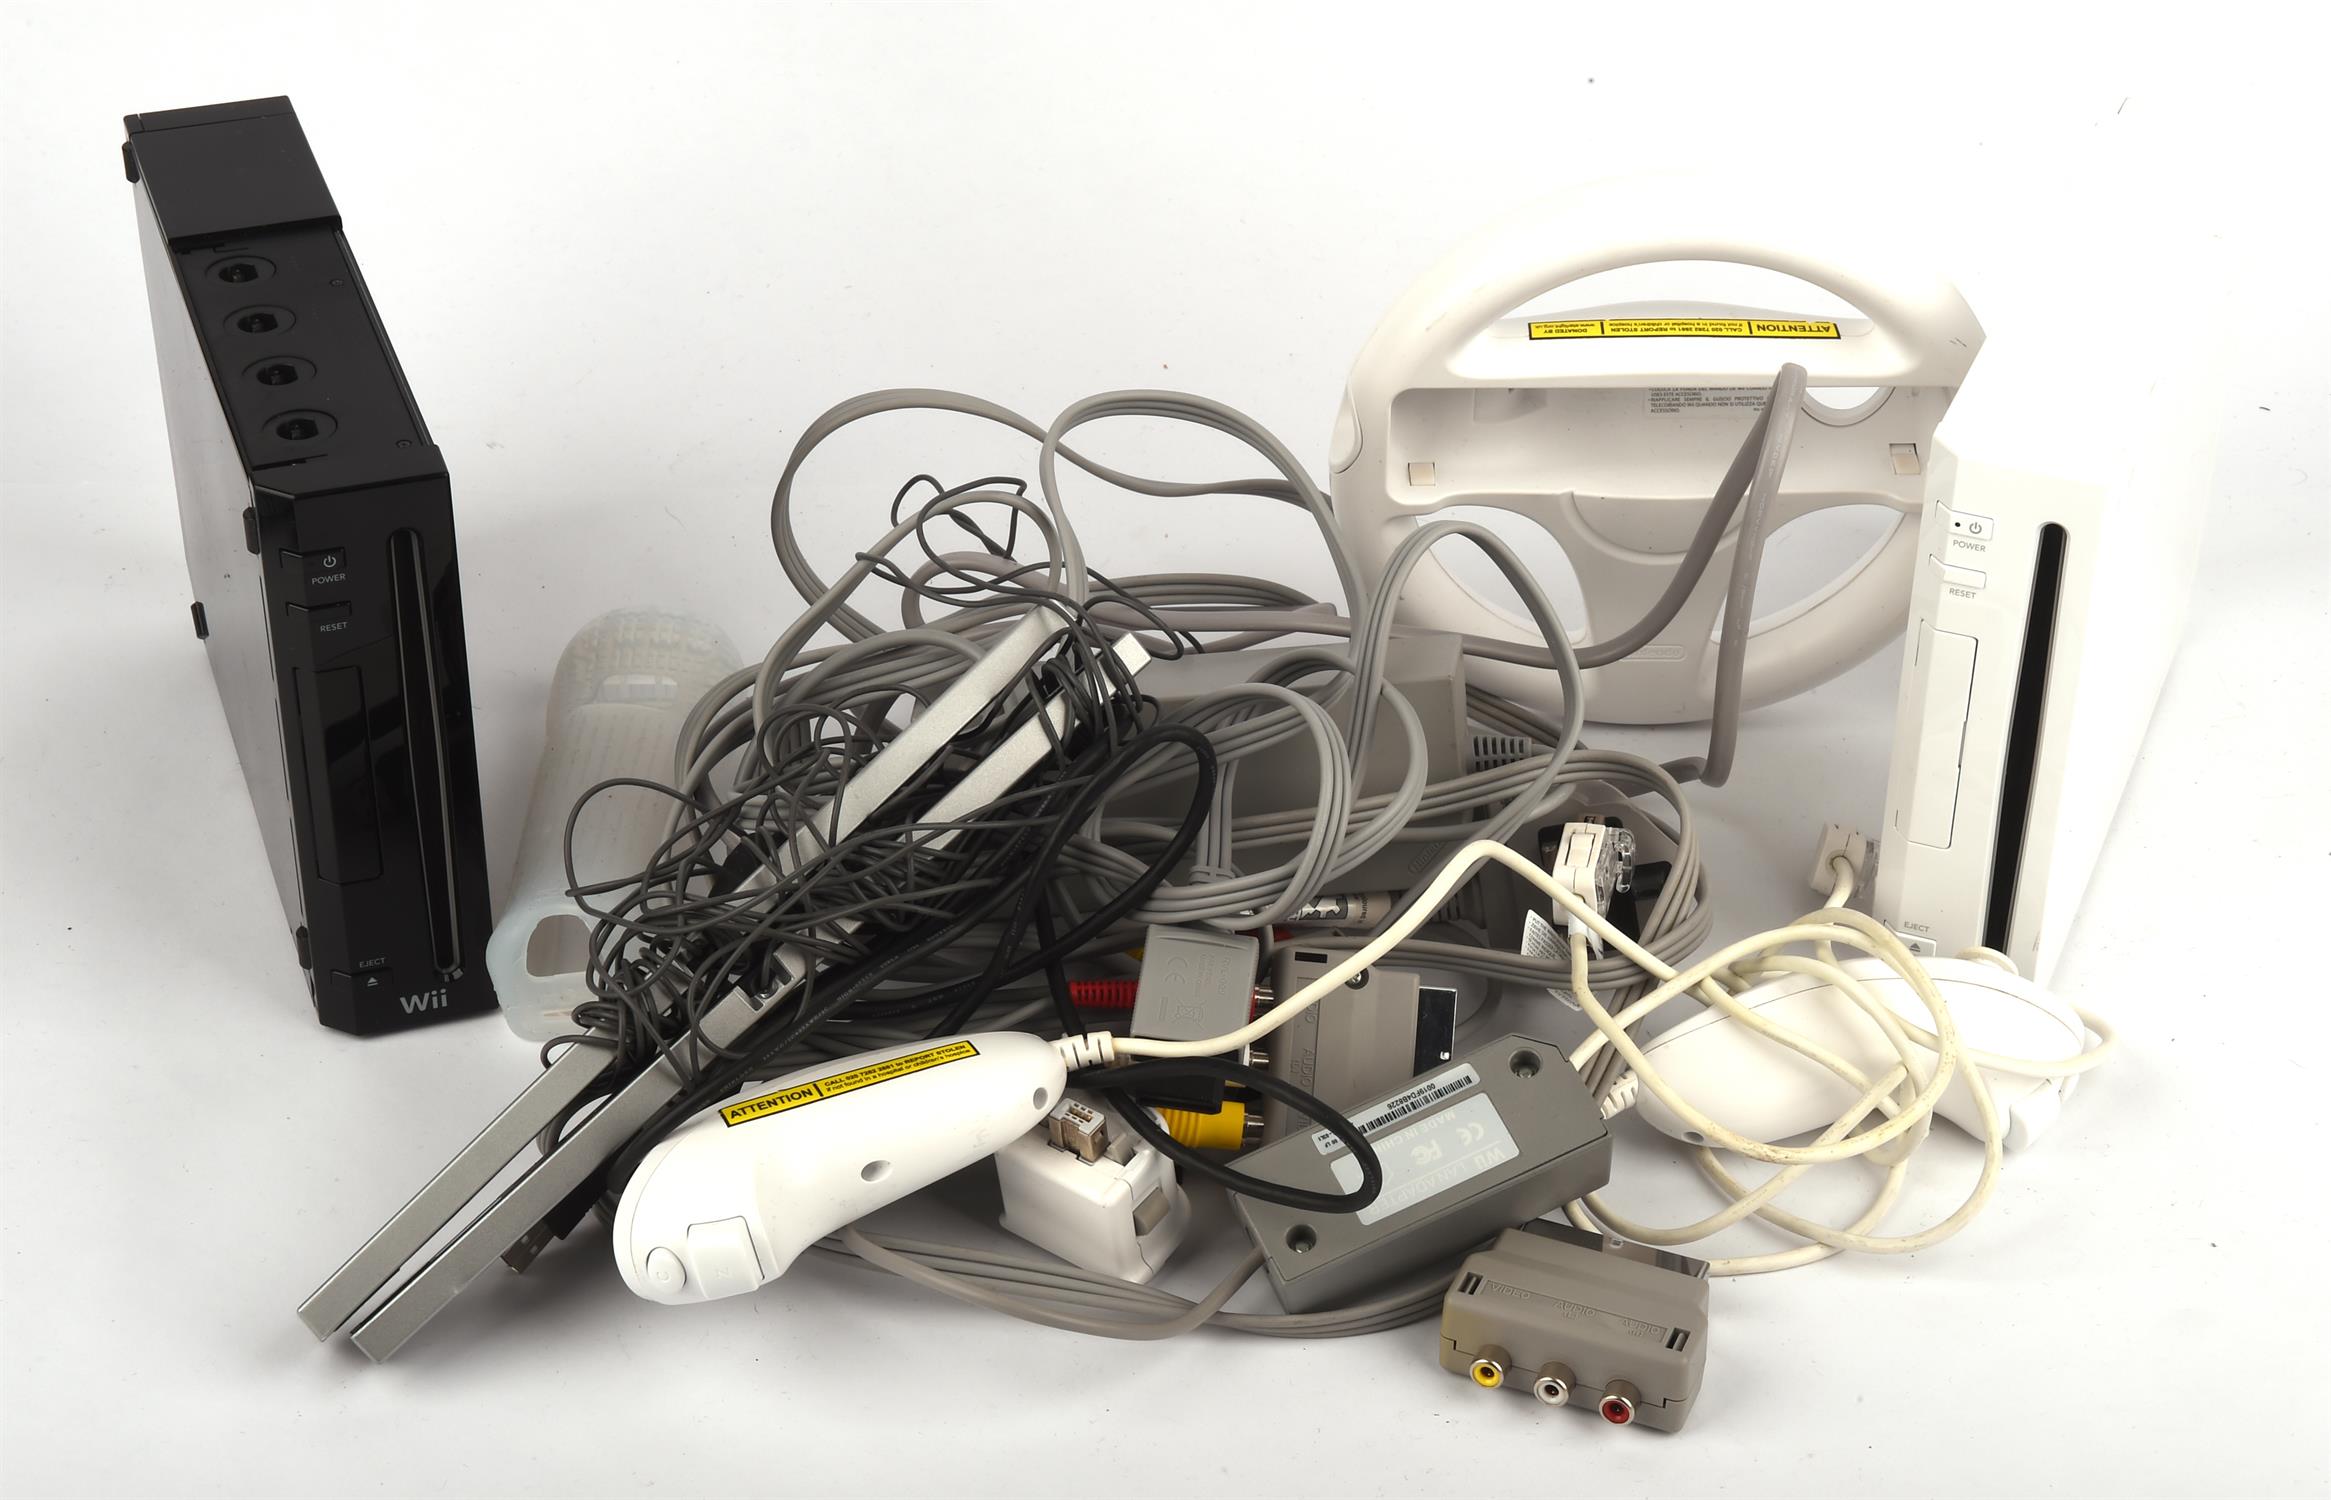 2 Nintendo Wii Consoles (one black and one white) and an assortment of cables and accessories